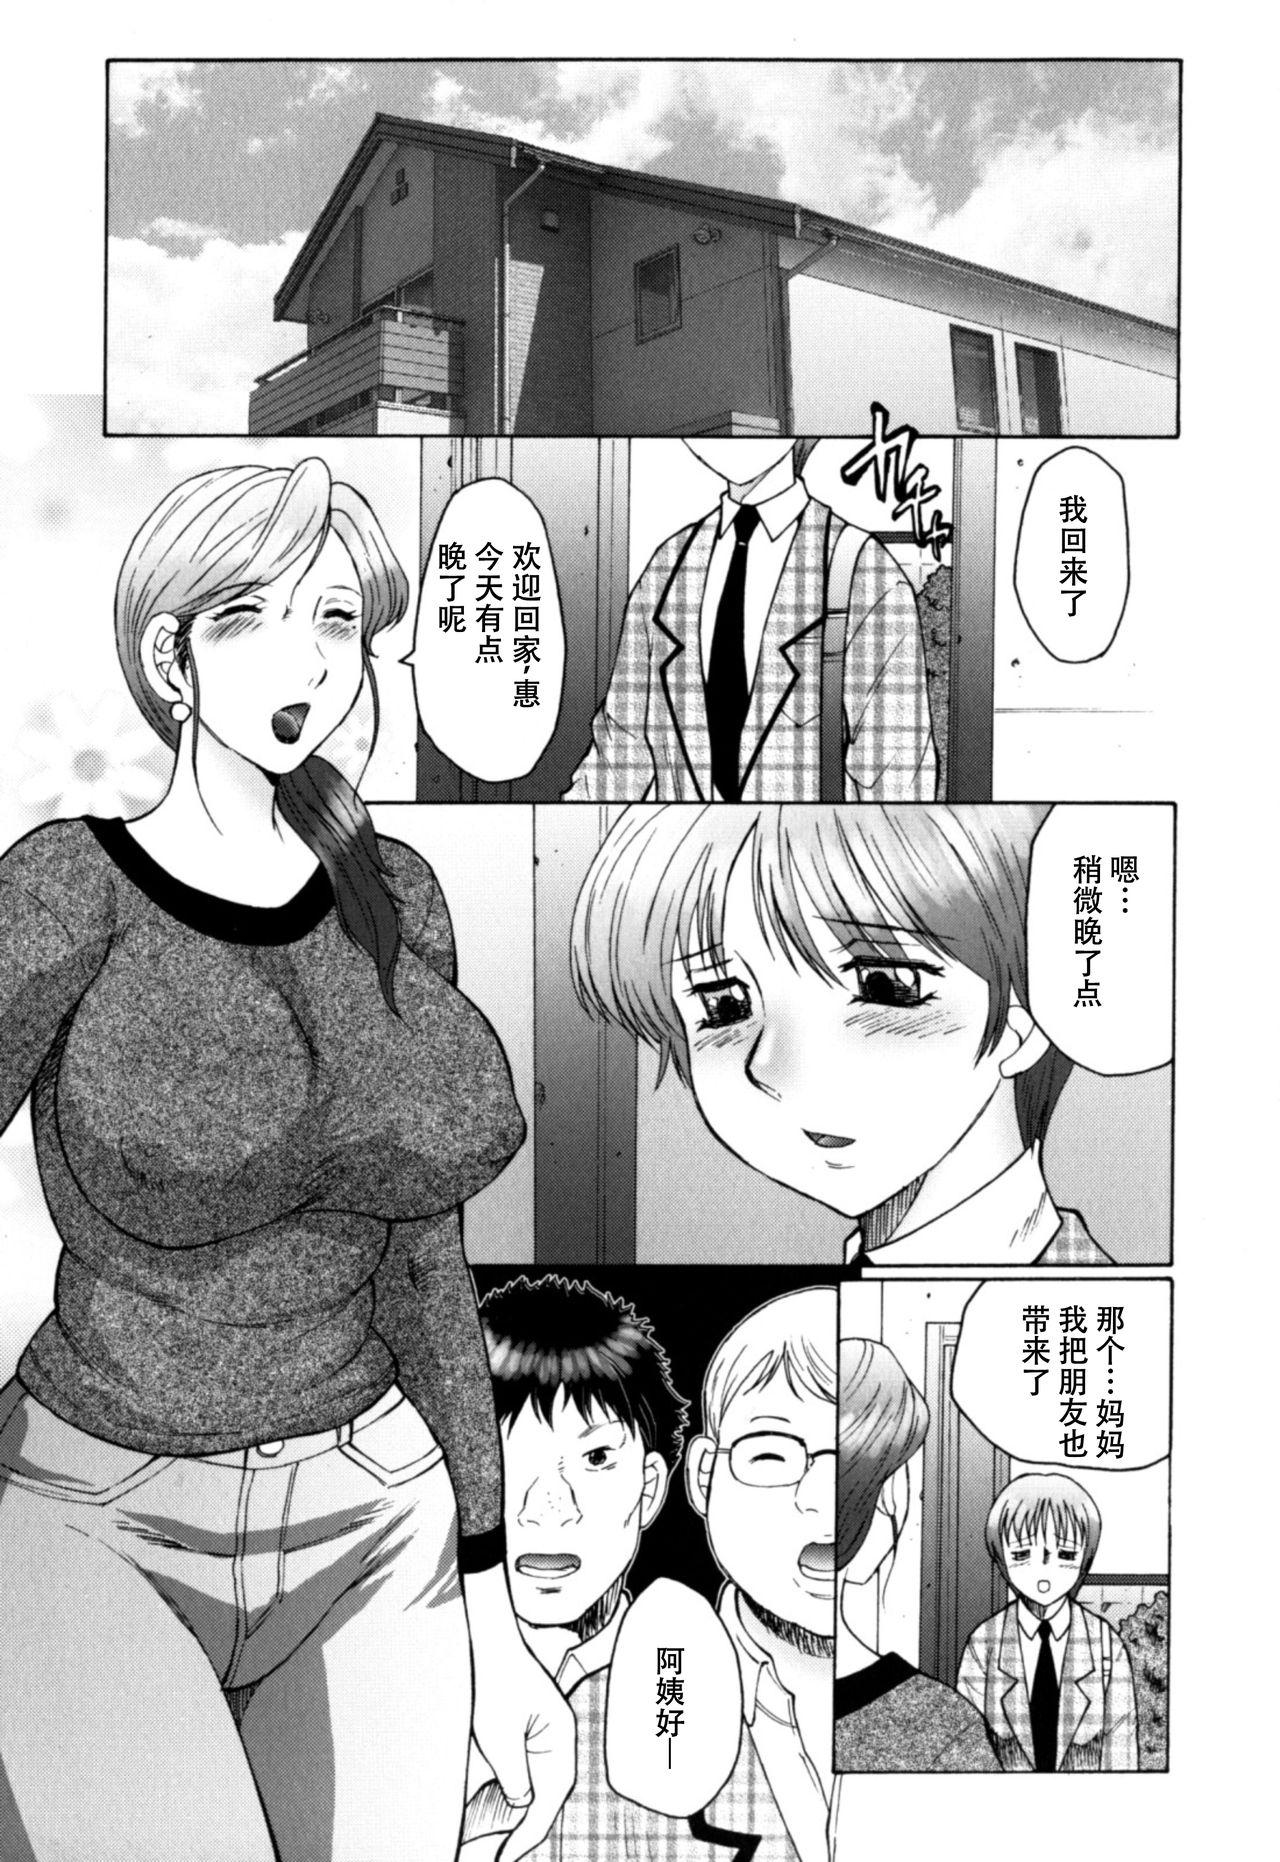 Oral Sex [Fuusen Club] Haha Mamire Ch. 1 [Chinese]【不可视汉化】 Reality Porn - Page 4